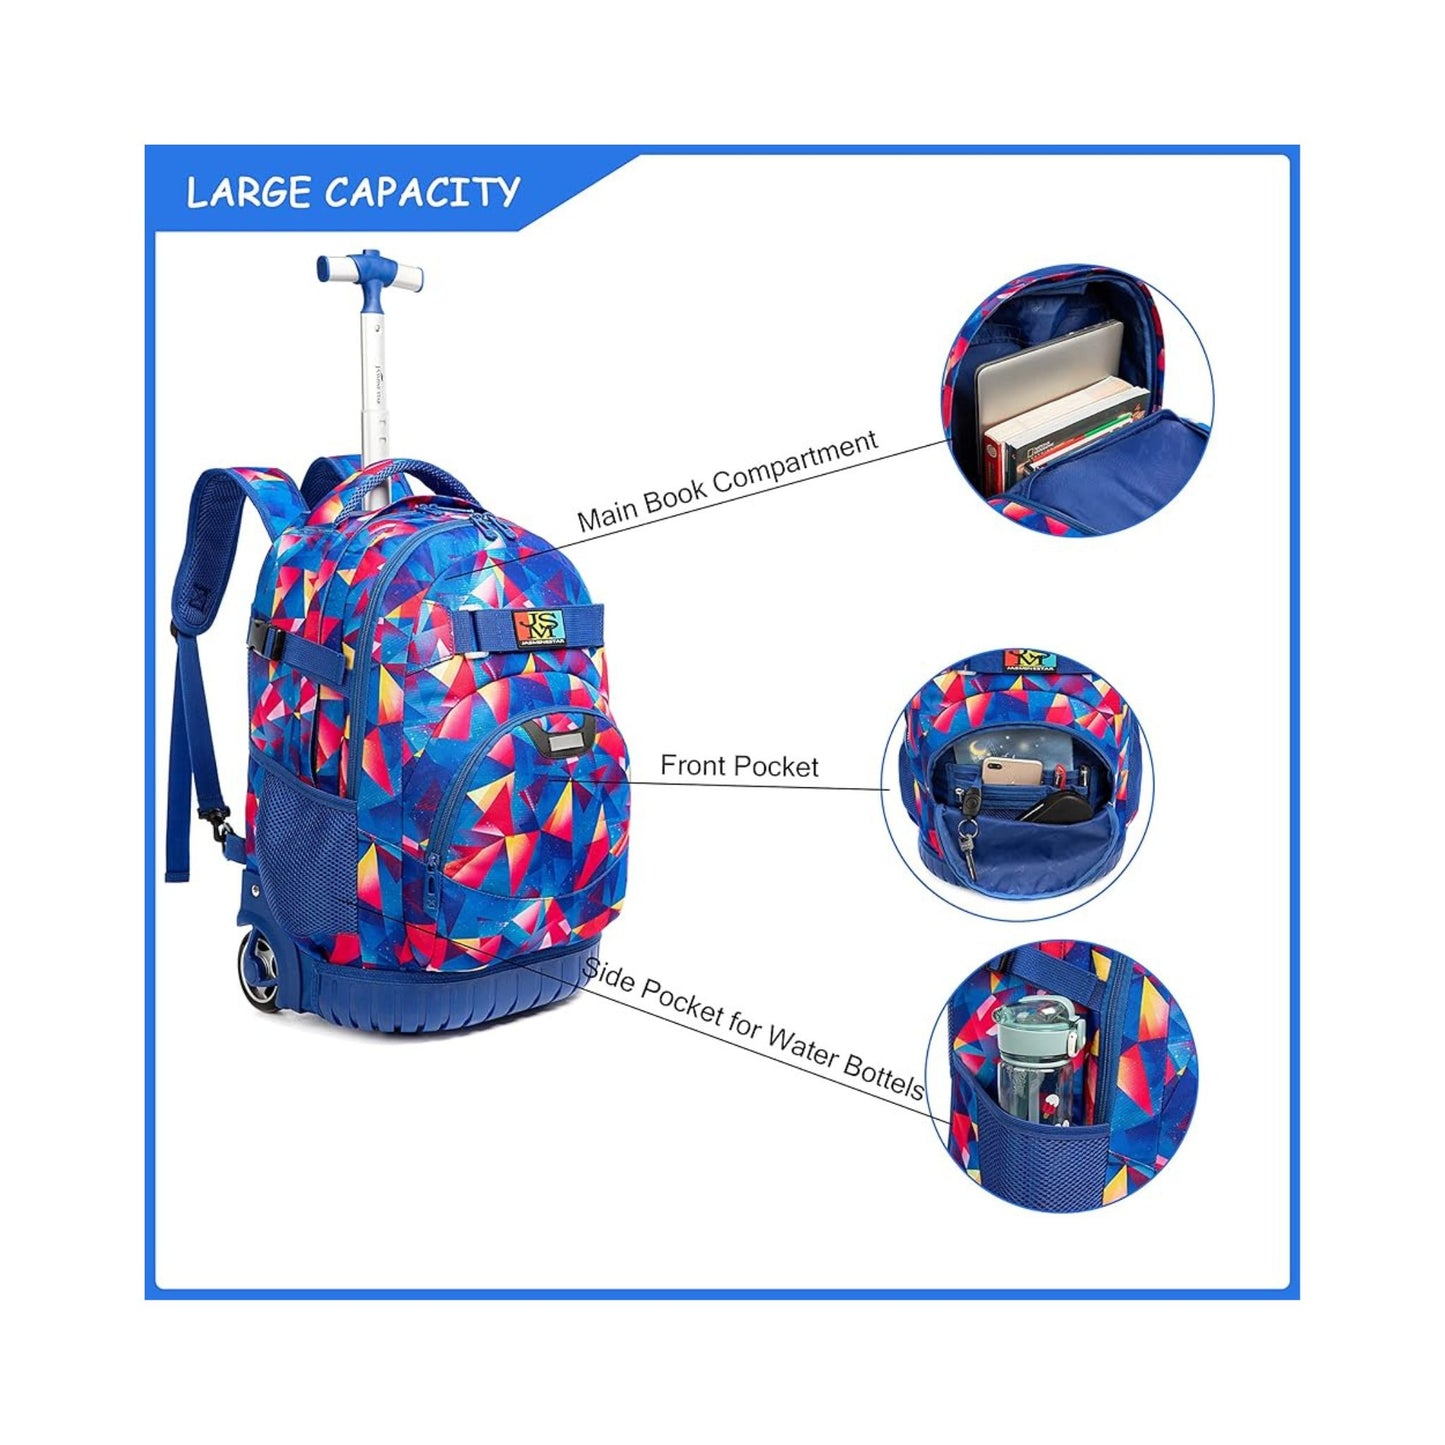 Colourful Abstract 3-Piece Backpack Set